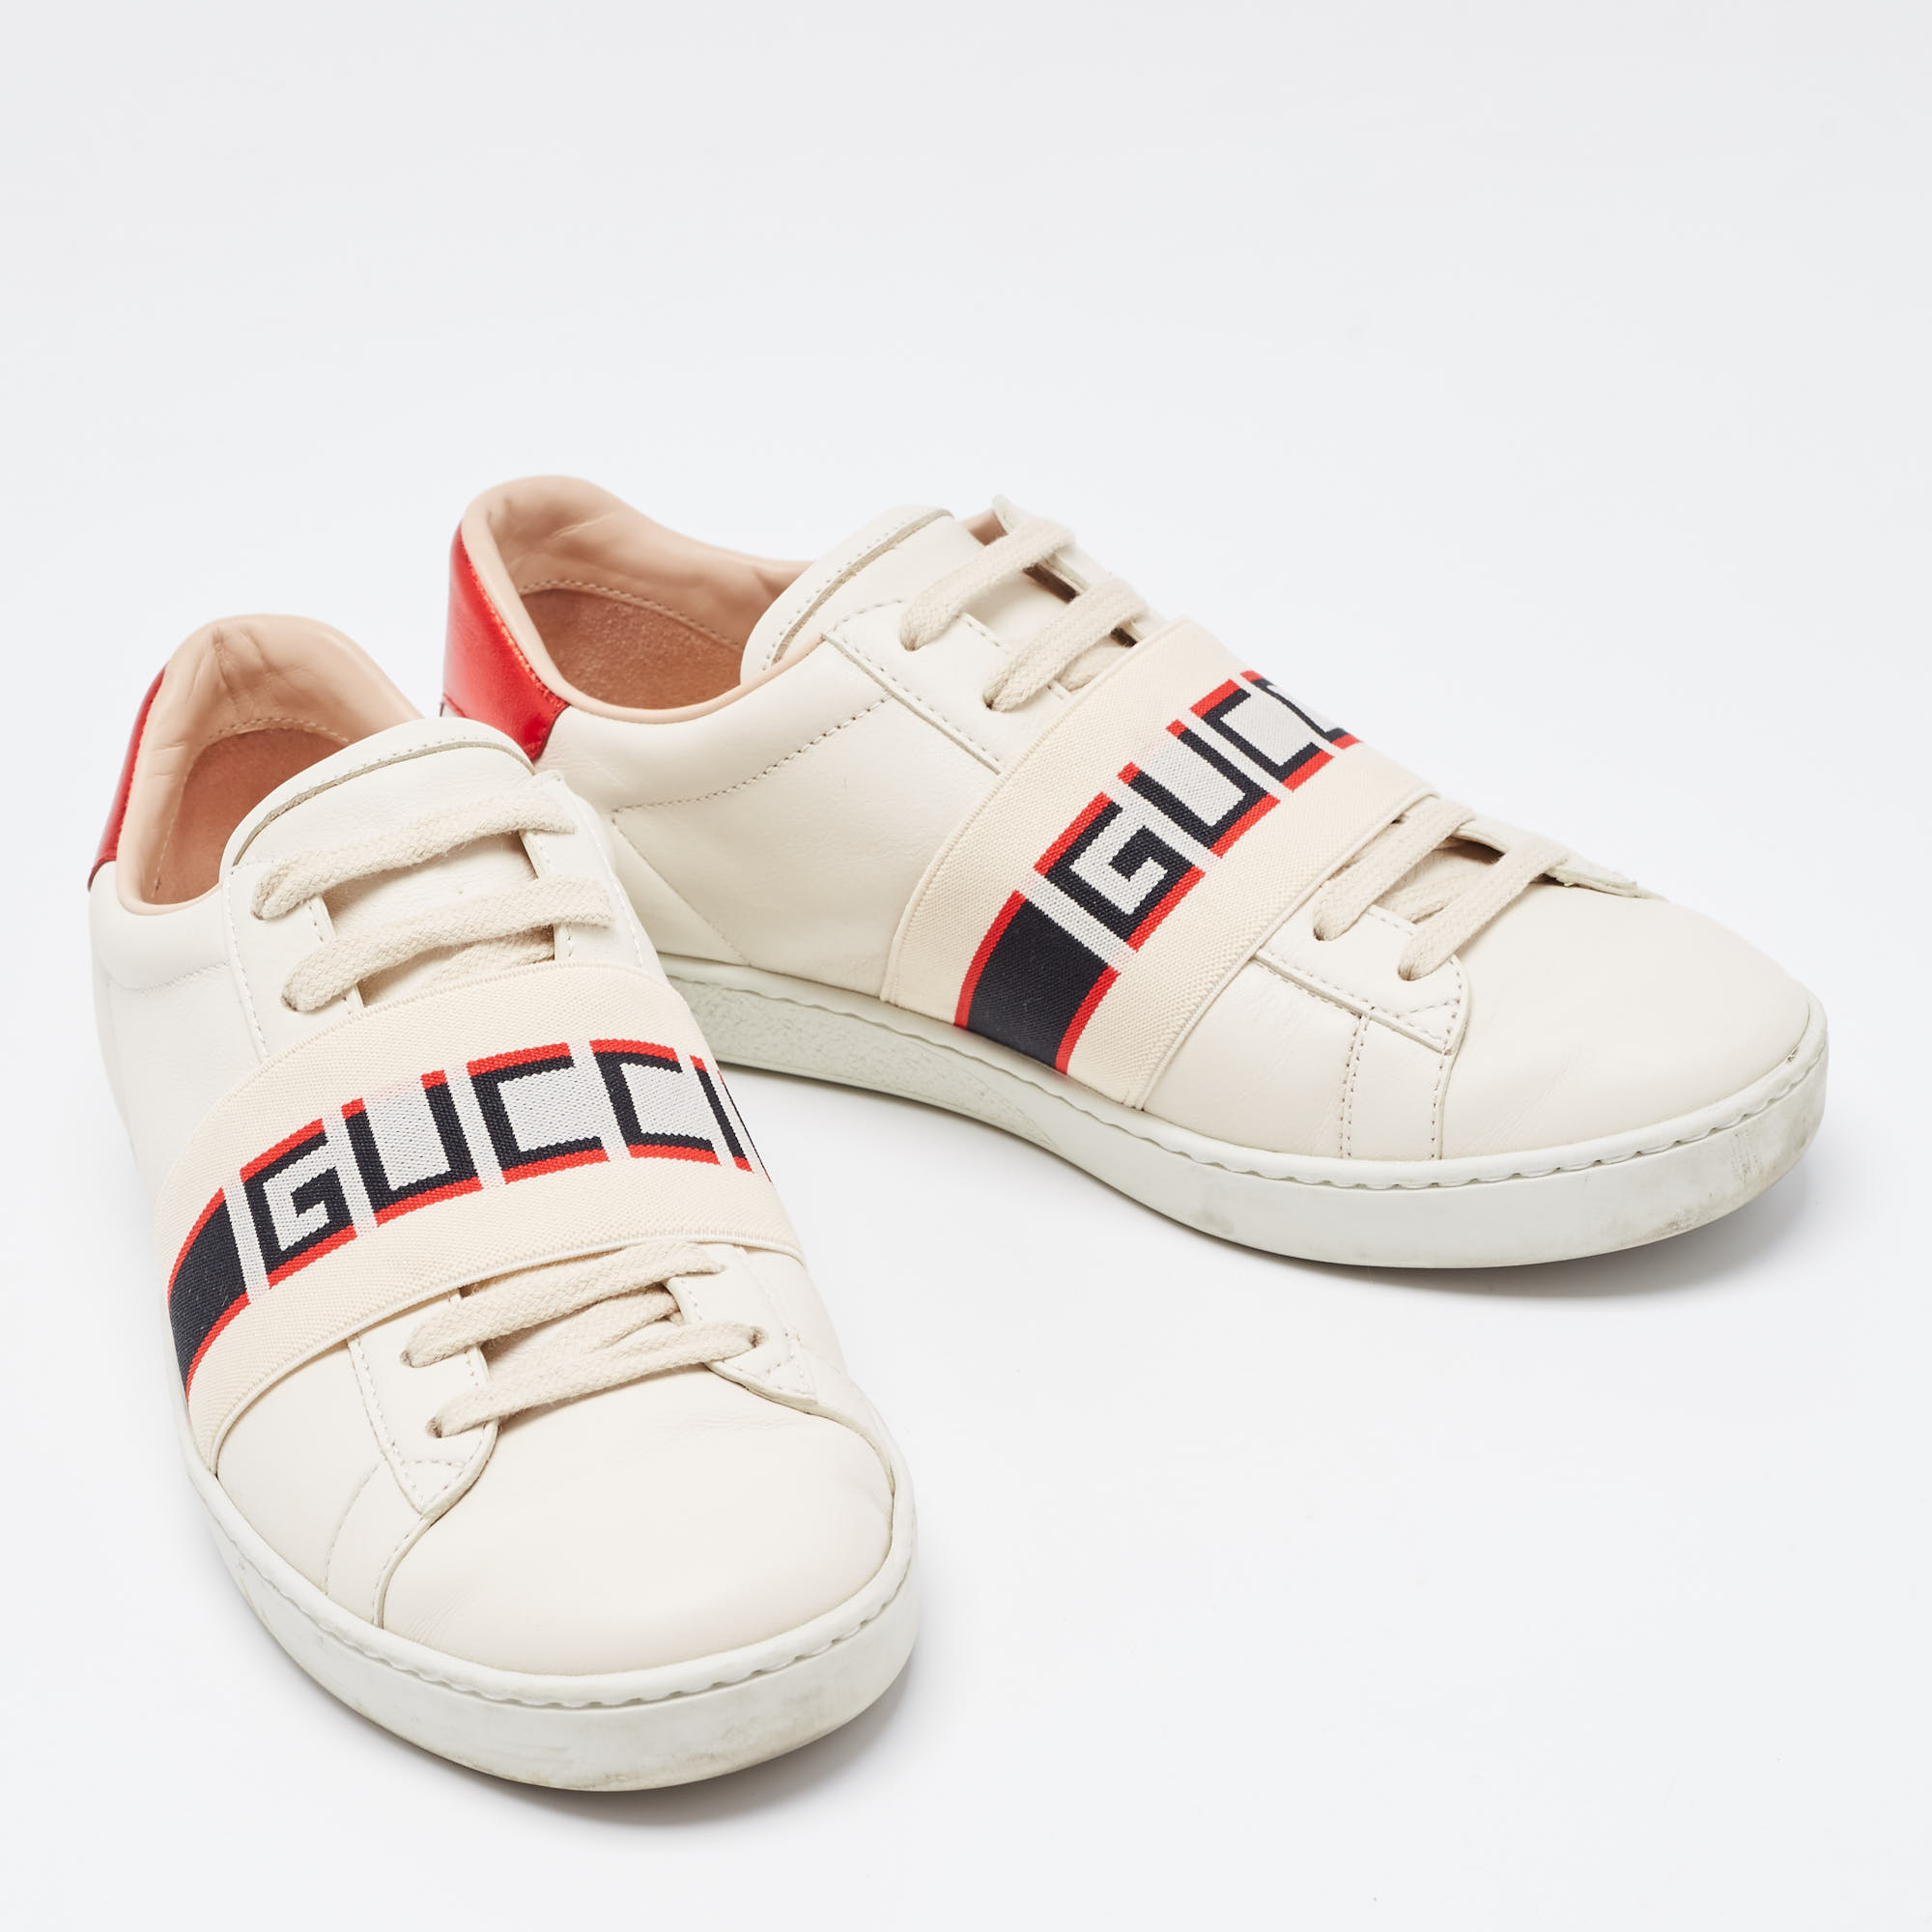 Gucci Cream/Red Leather Ace Gucci Band Low Top Sneakers Size 37